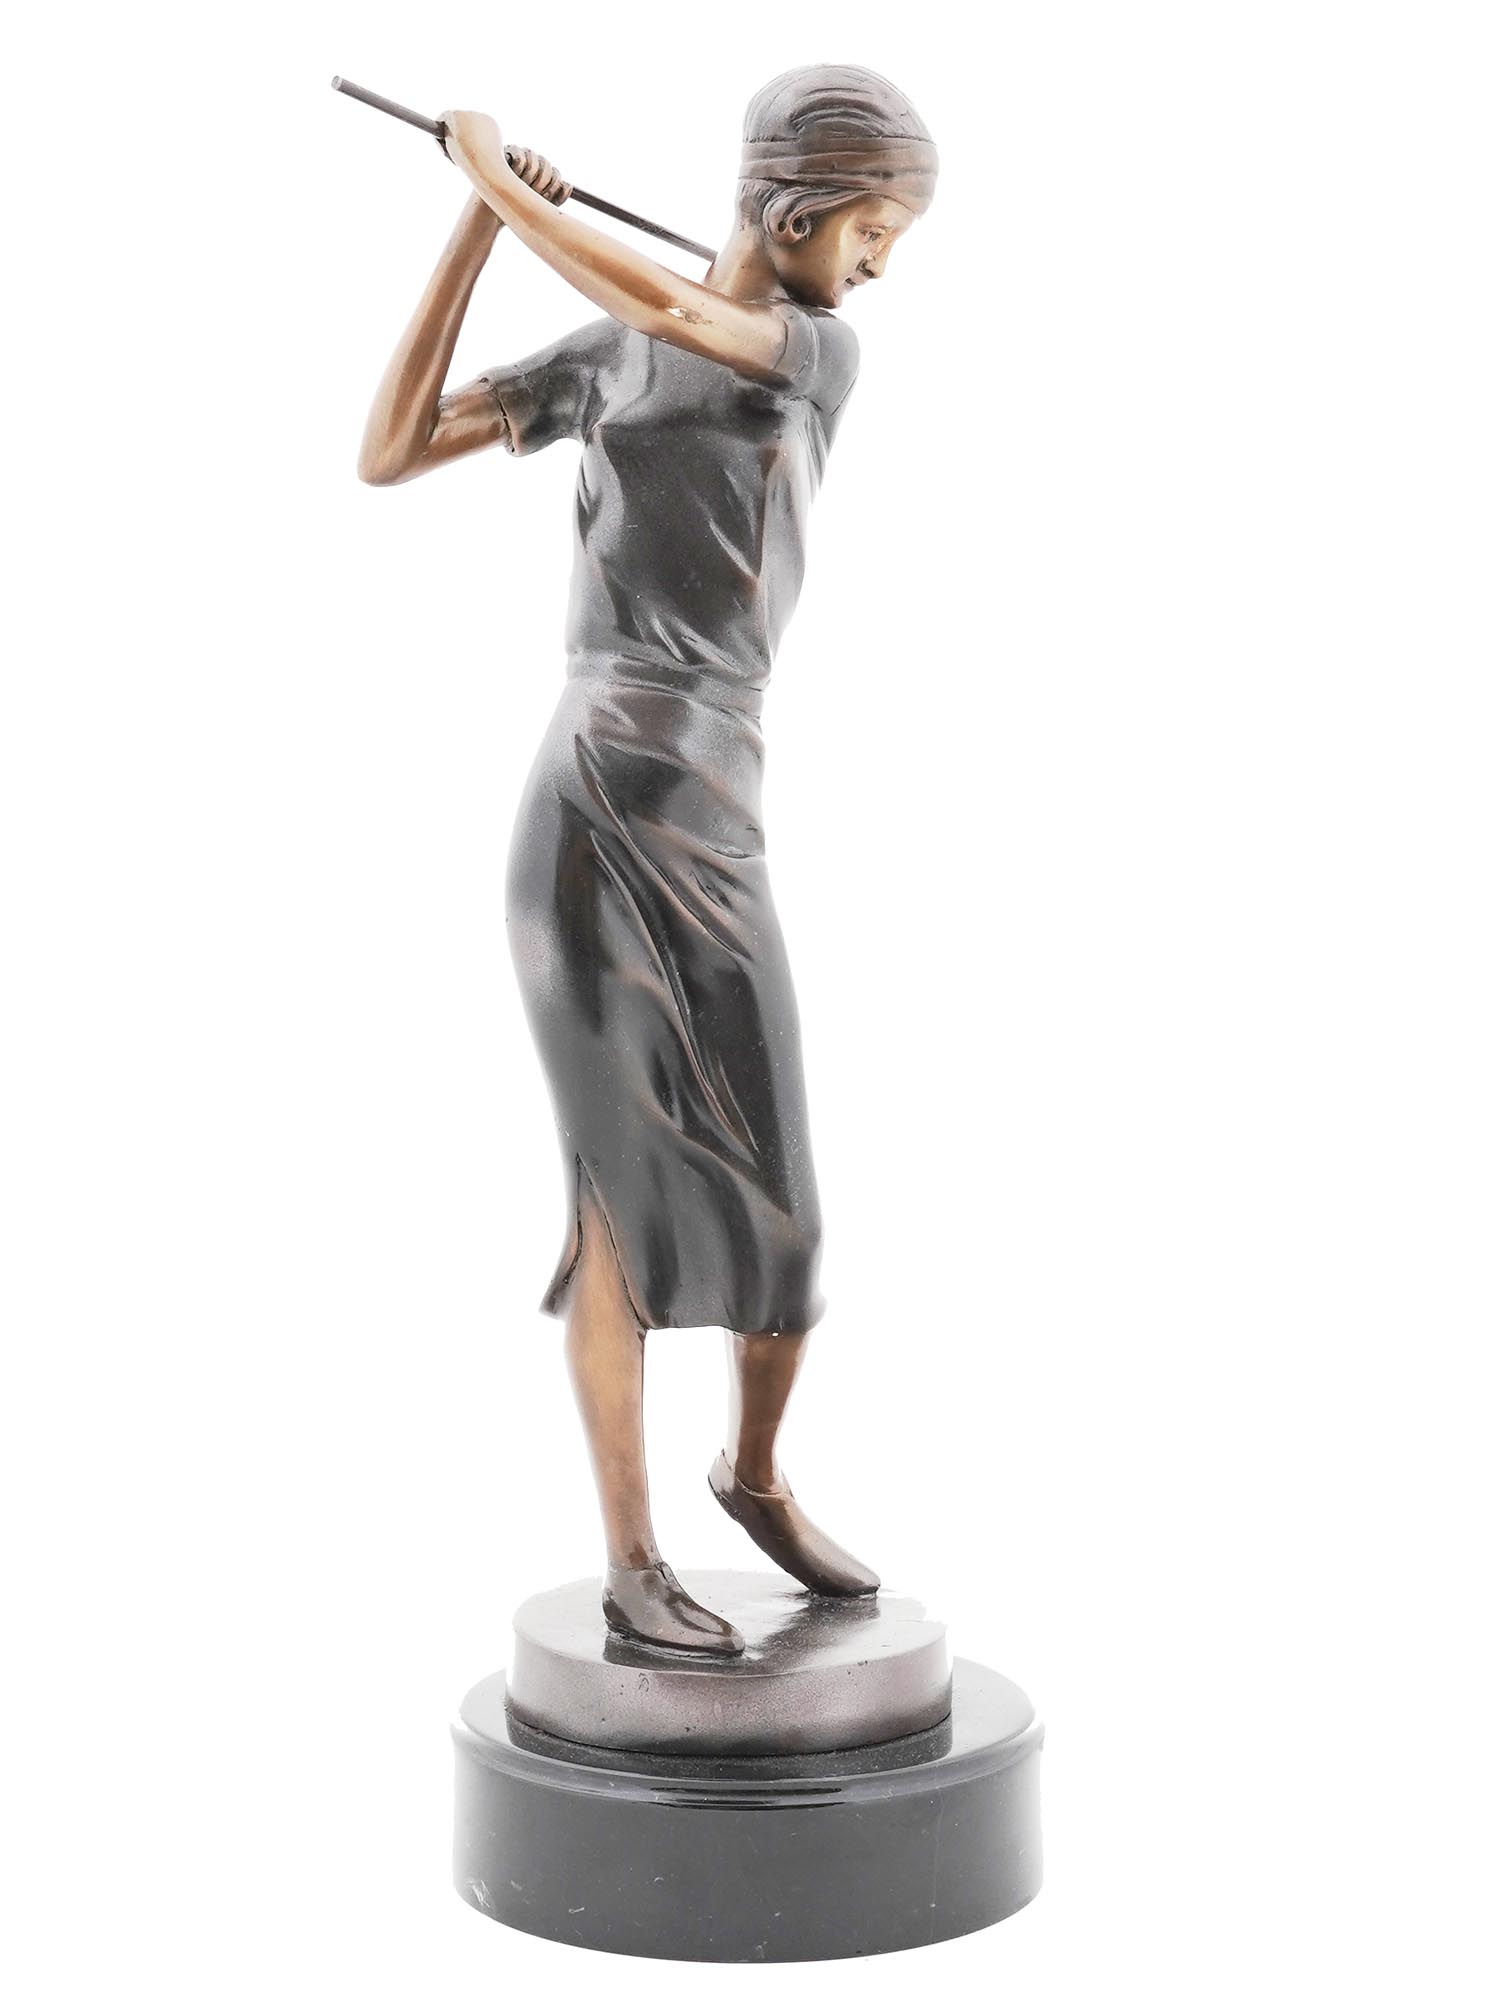 ART DECO BRONZE SCULPTURE OF LADY PLAYING GOLF PIC-1